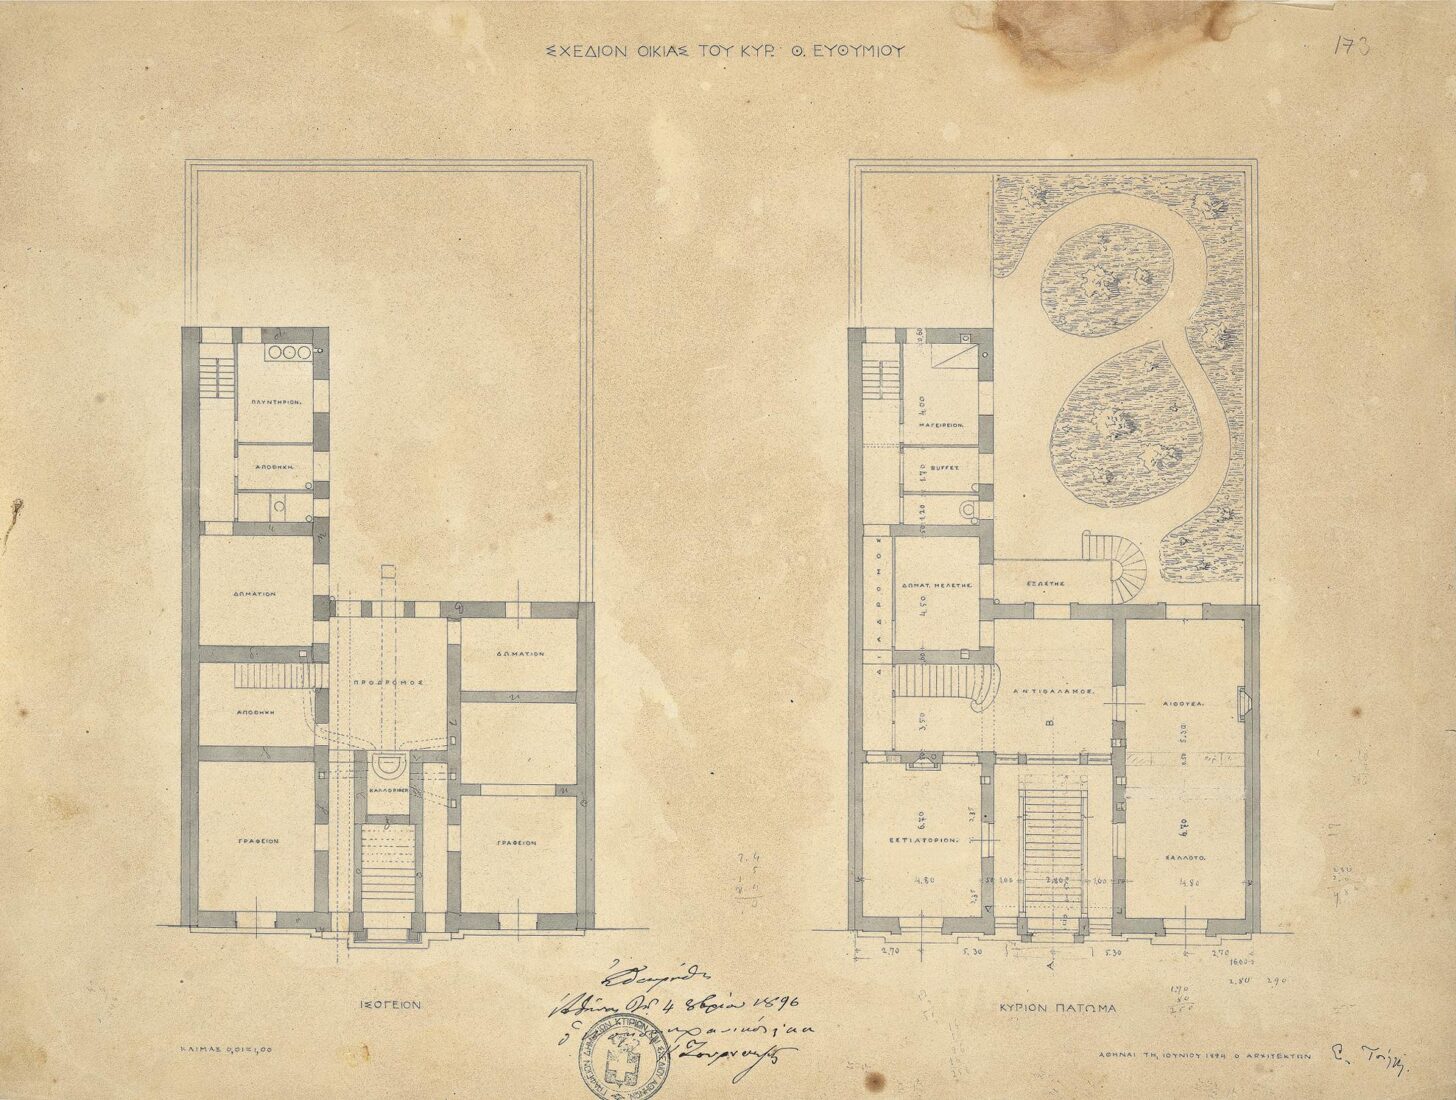 Th. Efthimiou House, 14 Panepistimiou Street, Plans of the Ground Floor and 1st Floor - Ziller Ernst